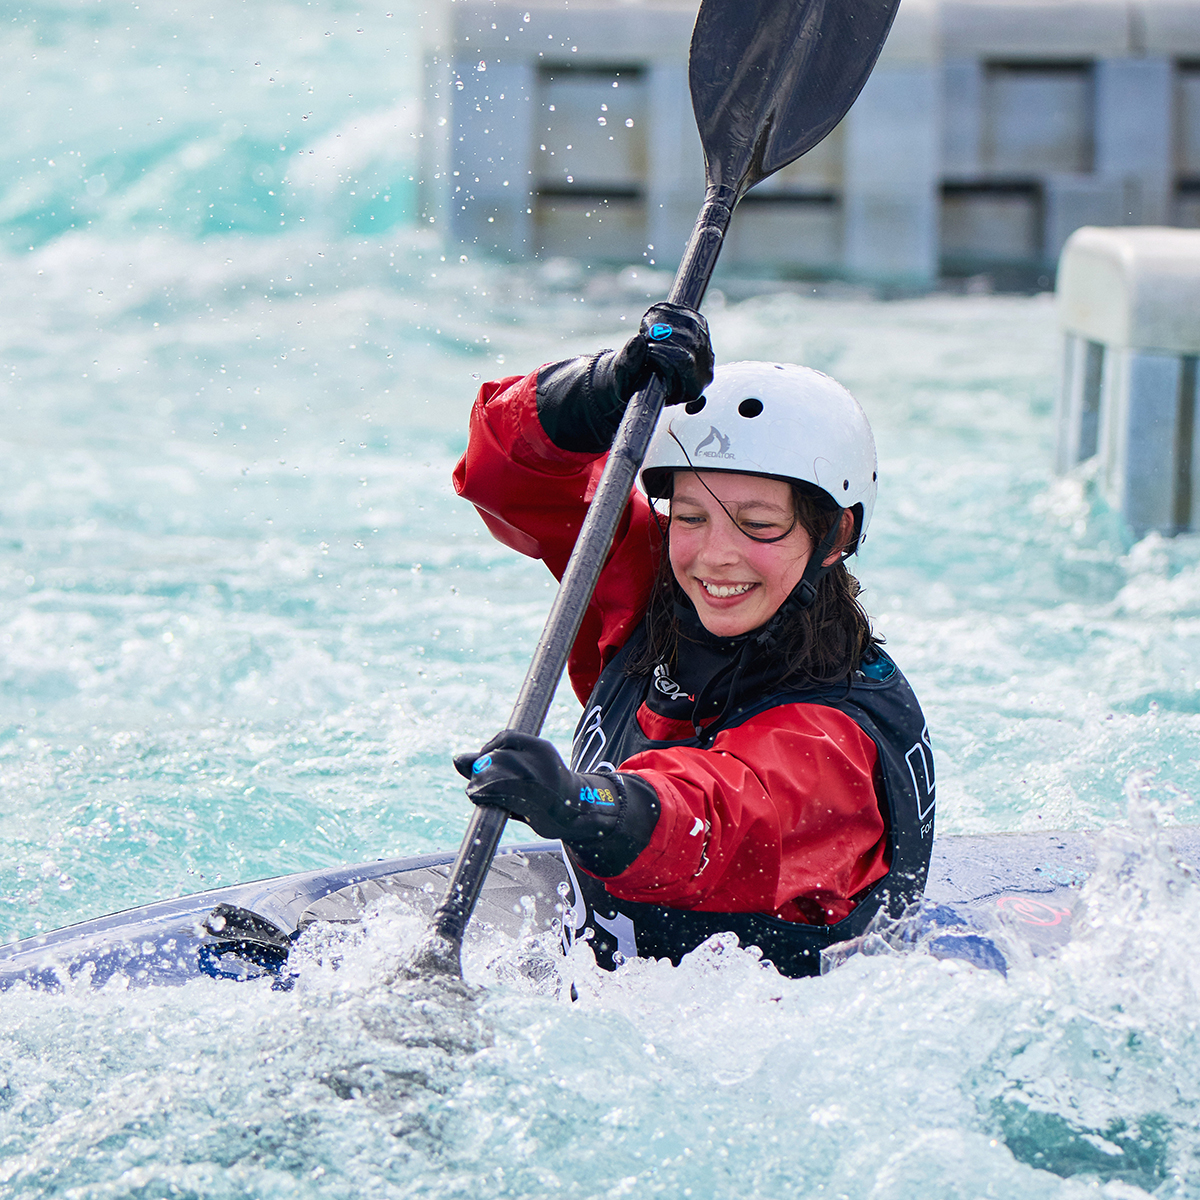 🚣‍♂️ Dive into adventure at the inaugural Lee Valley Paddle Festival! 🌊 Register now for early bird discounts and secure your spot for a thrilling weekend of paddling excitement from 5-7 July. 👉 brnw.ch/21wJ9yQ